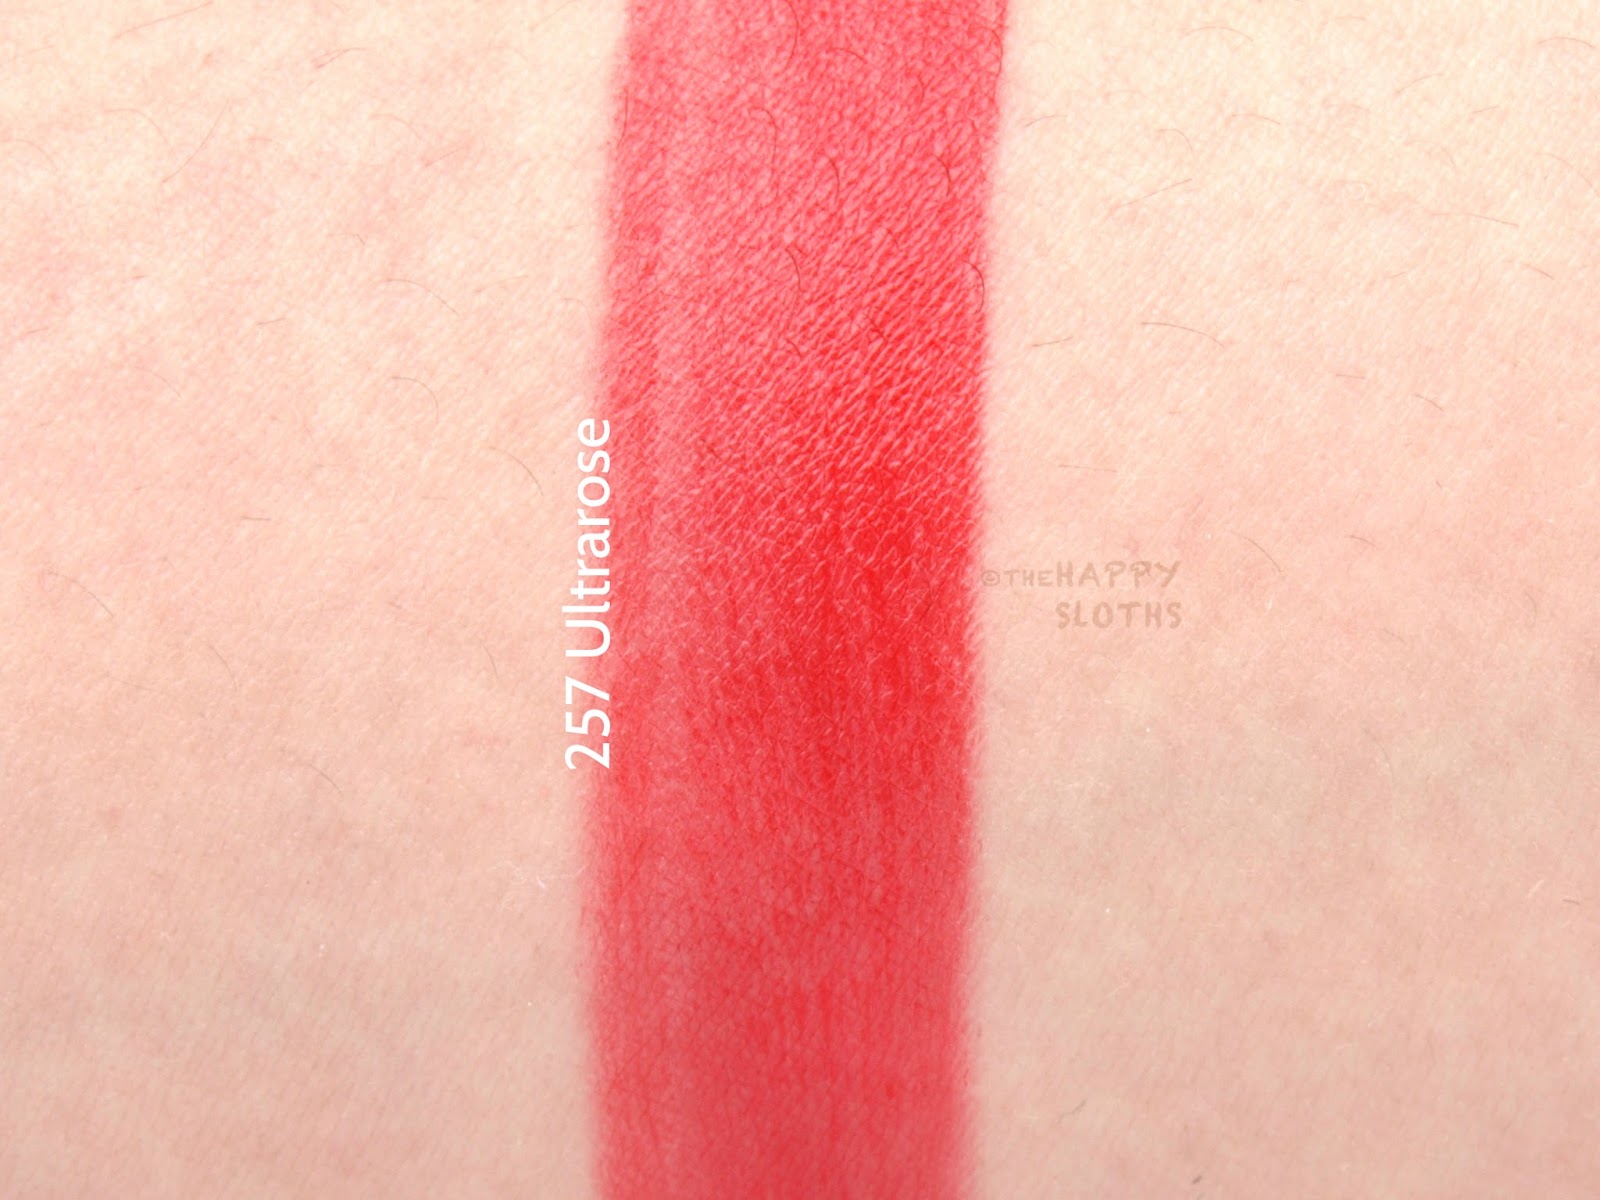 Chanel Holiday 2016 Collection Rouge Allure Lipstick Ultrarose Swatches Review